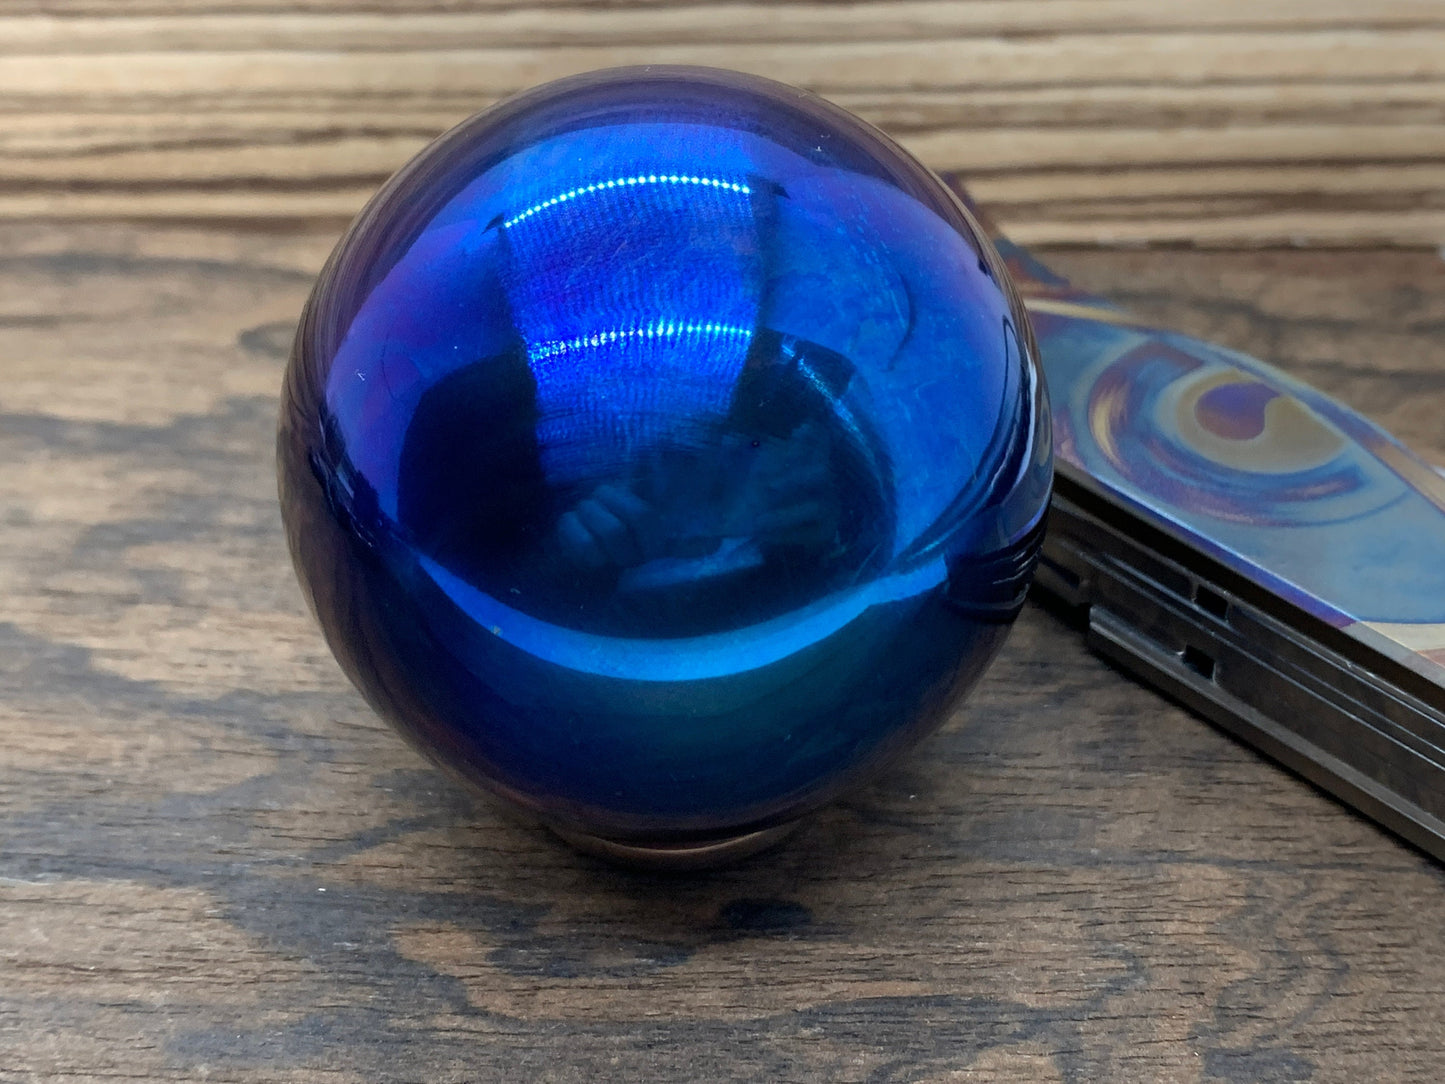 2.15" Flamed Polished Solid Giga Titanium SPHERE +Glow in the dark stand